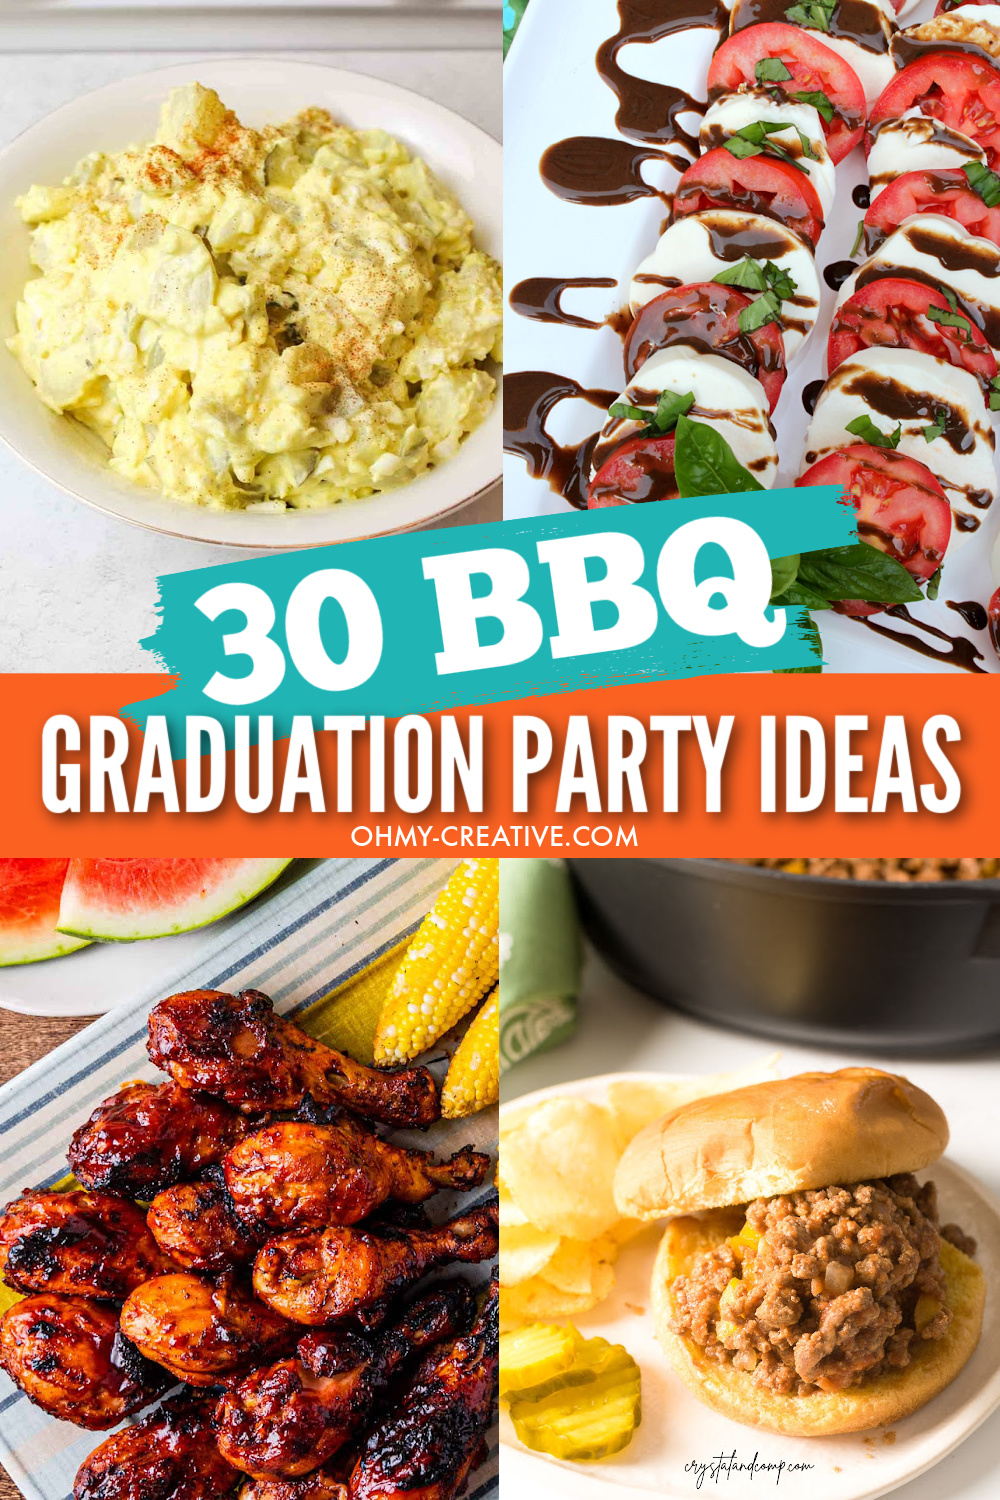 30 Awesome BBQ Graduation Party Ideas To Celebrate The Grad